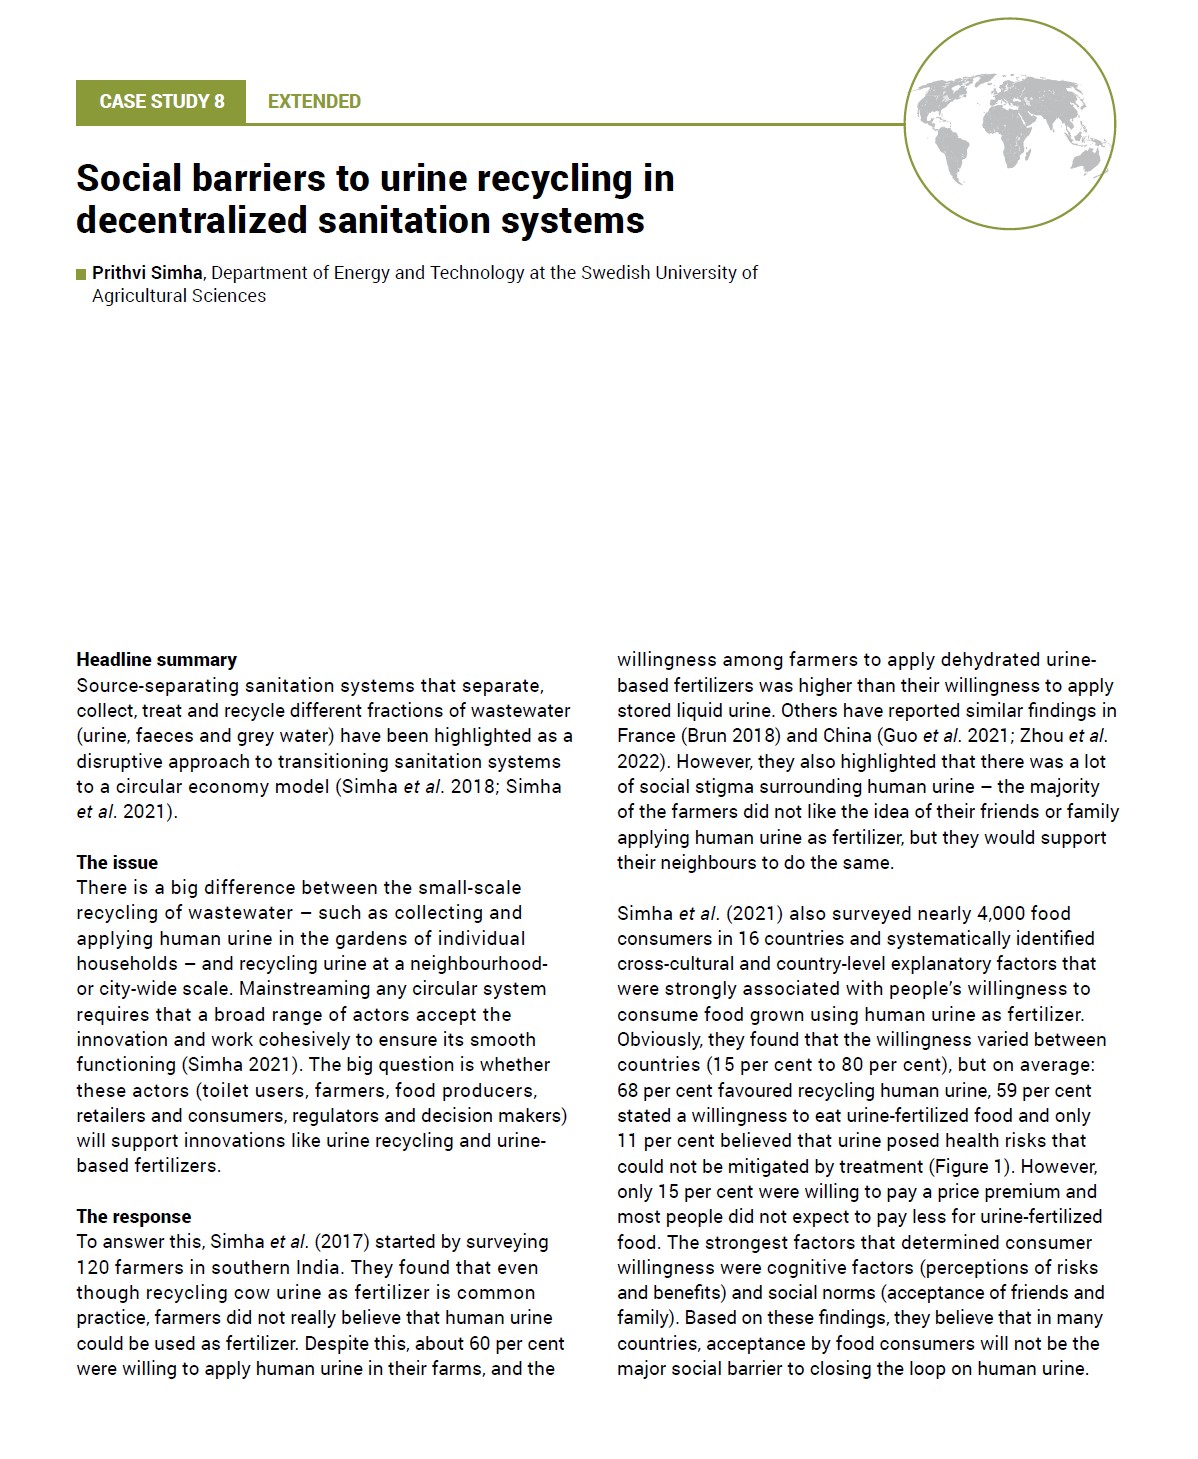 Case Study 8: Social barriers to urine recycling in decentralized sanitation systems